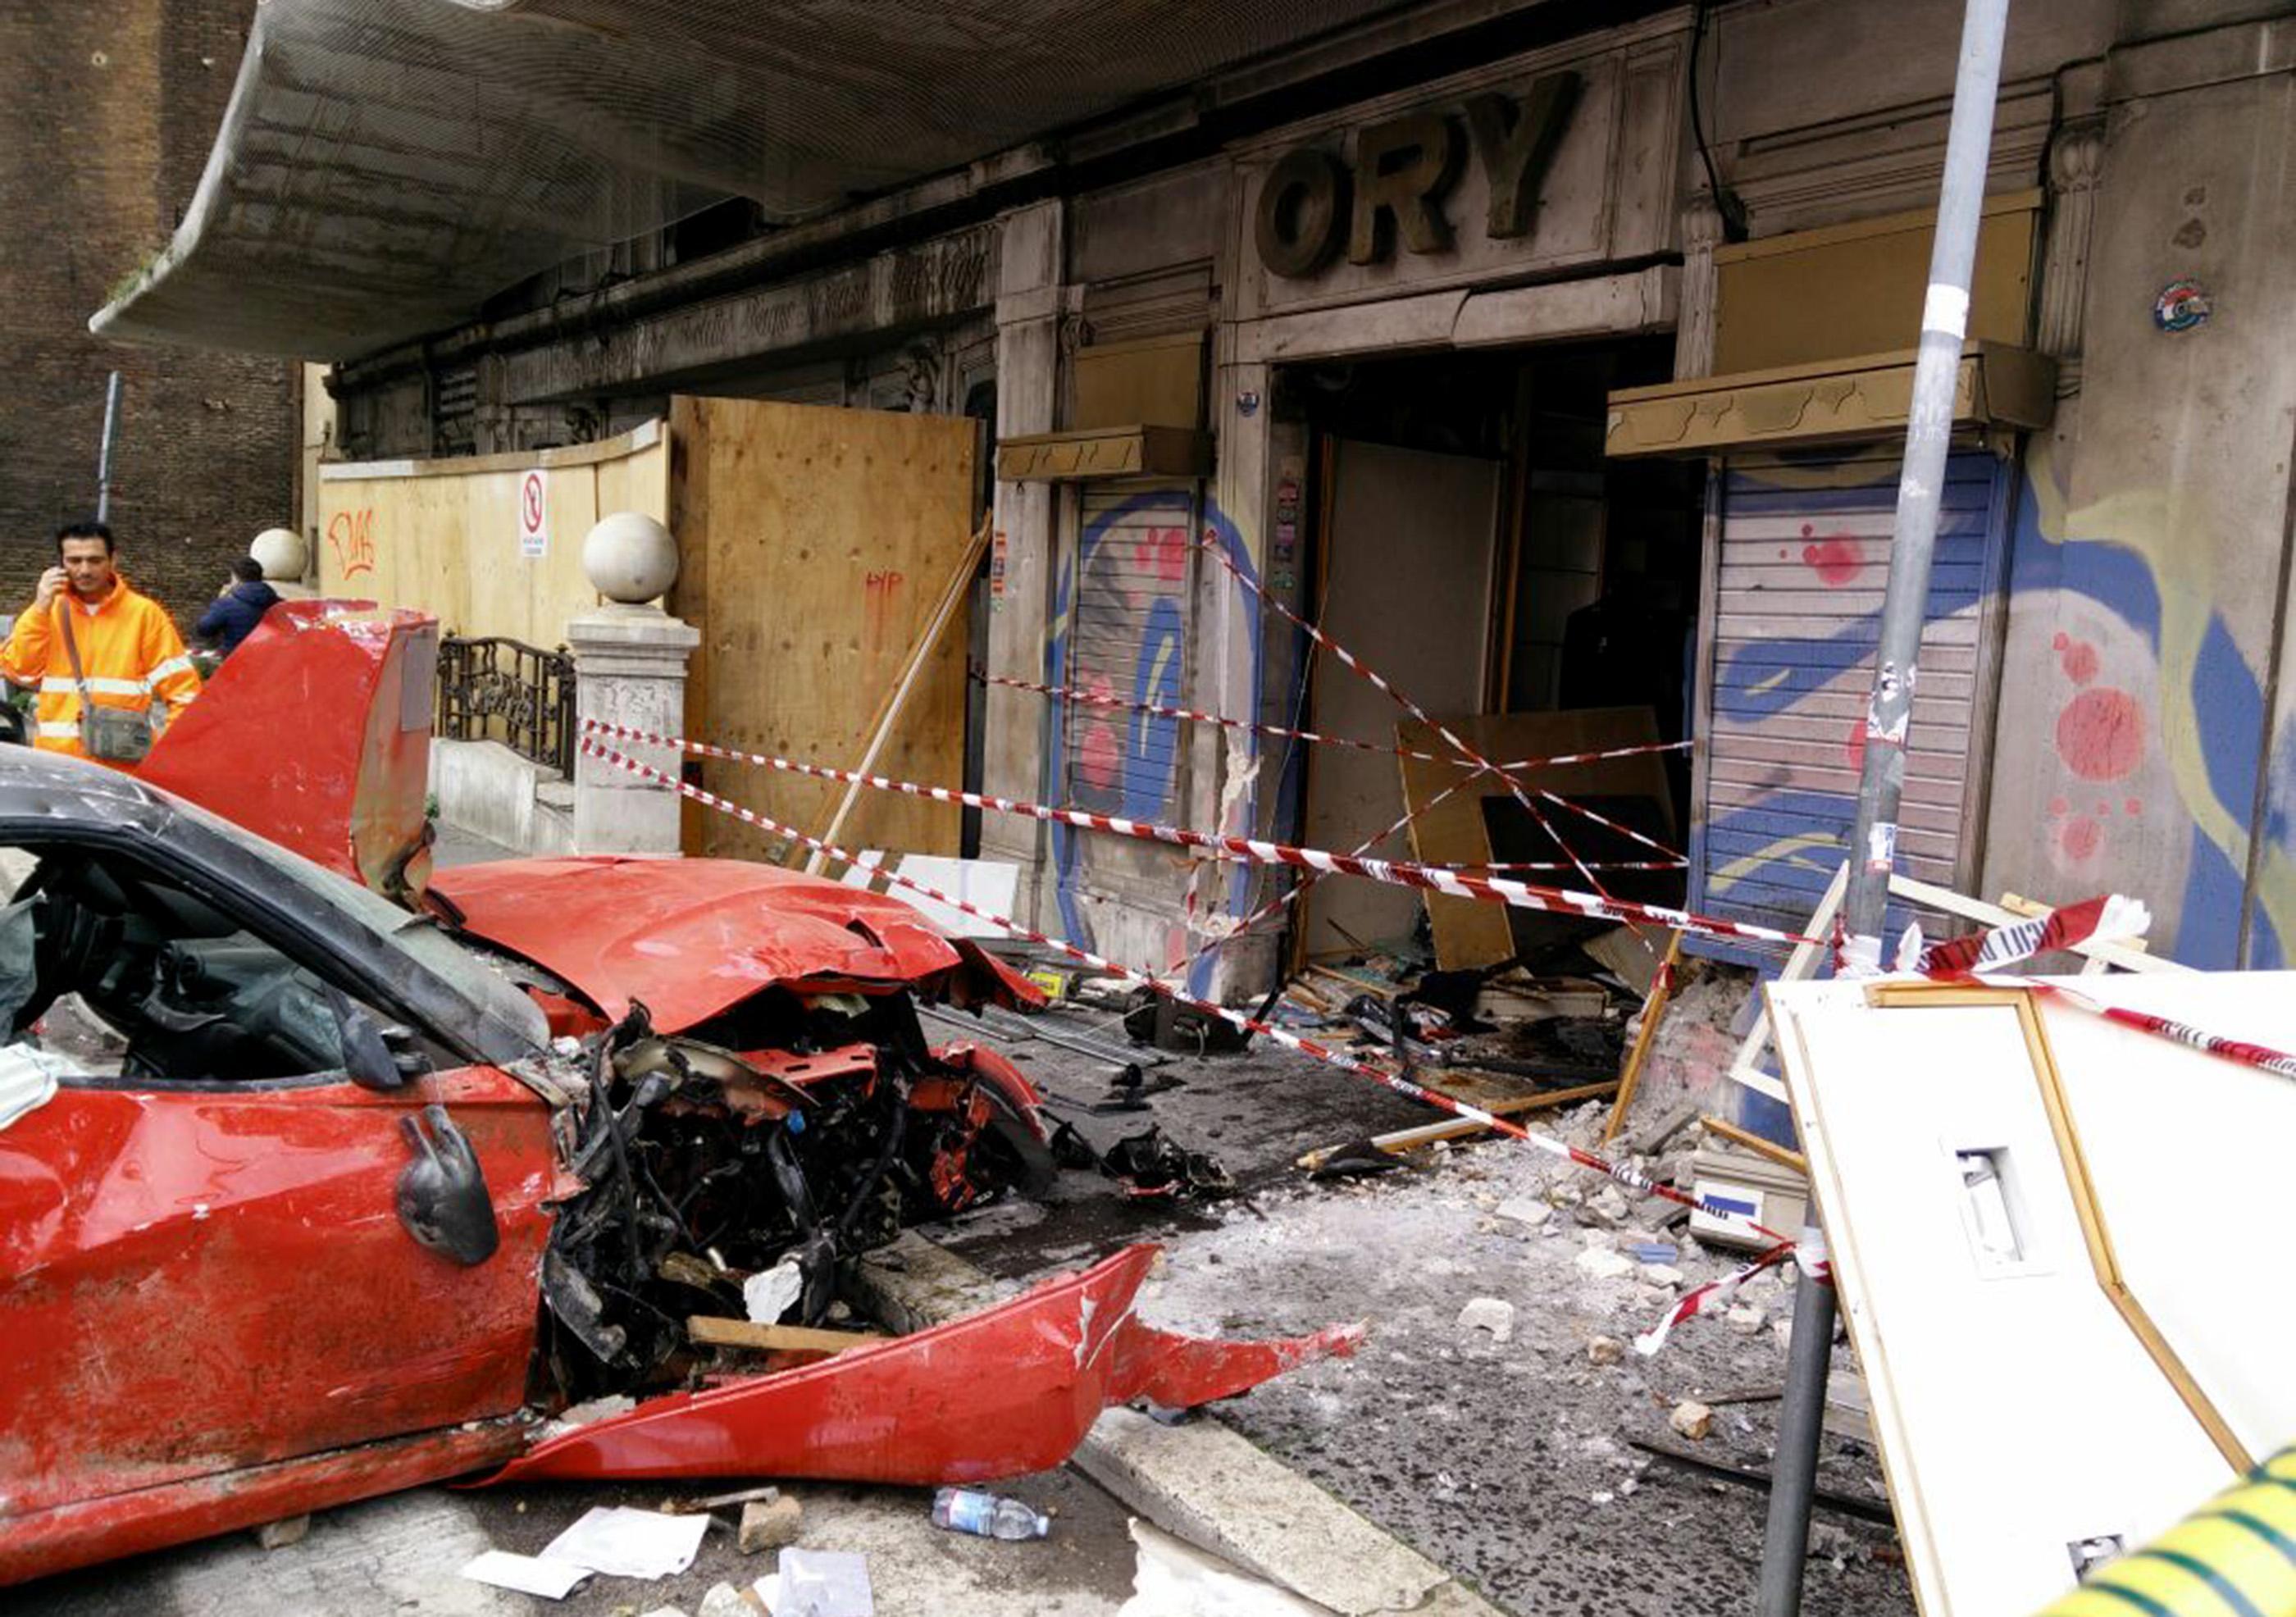 The aftermath following a ferrari 599 GTO which crashed into a shop in Viminale's road in Rome, Italy, on March 30, 2015 (Claudio Peri—EPA)